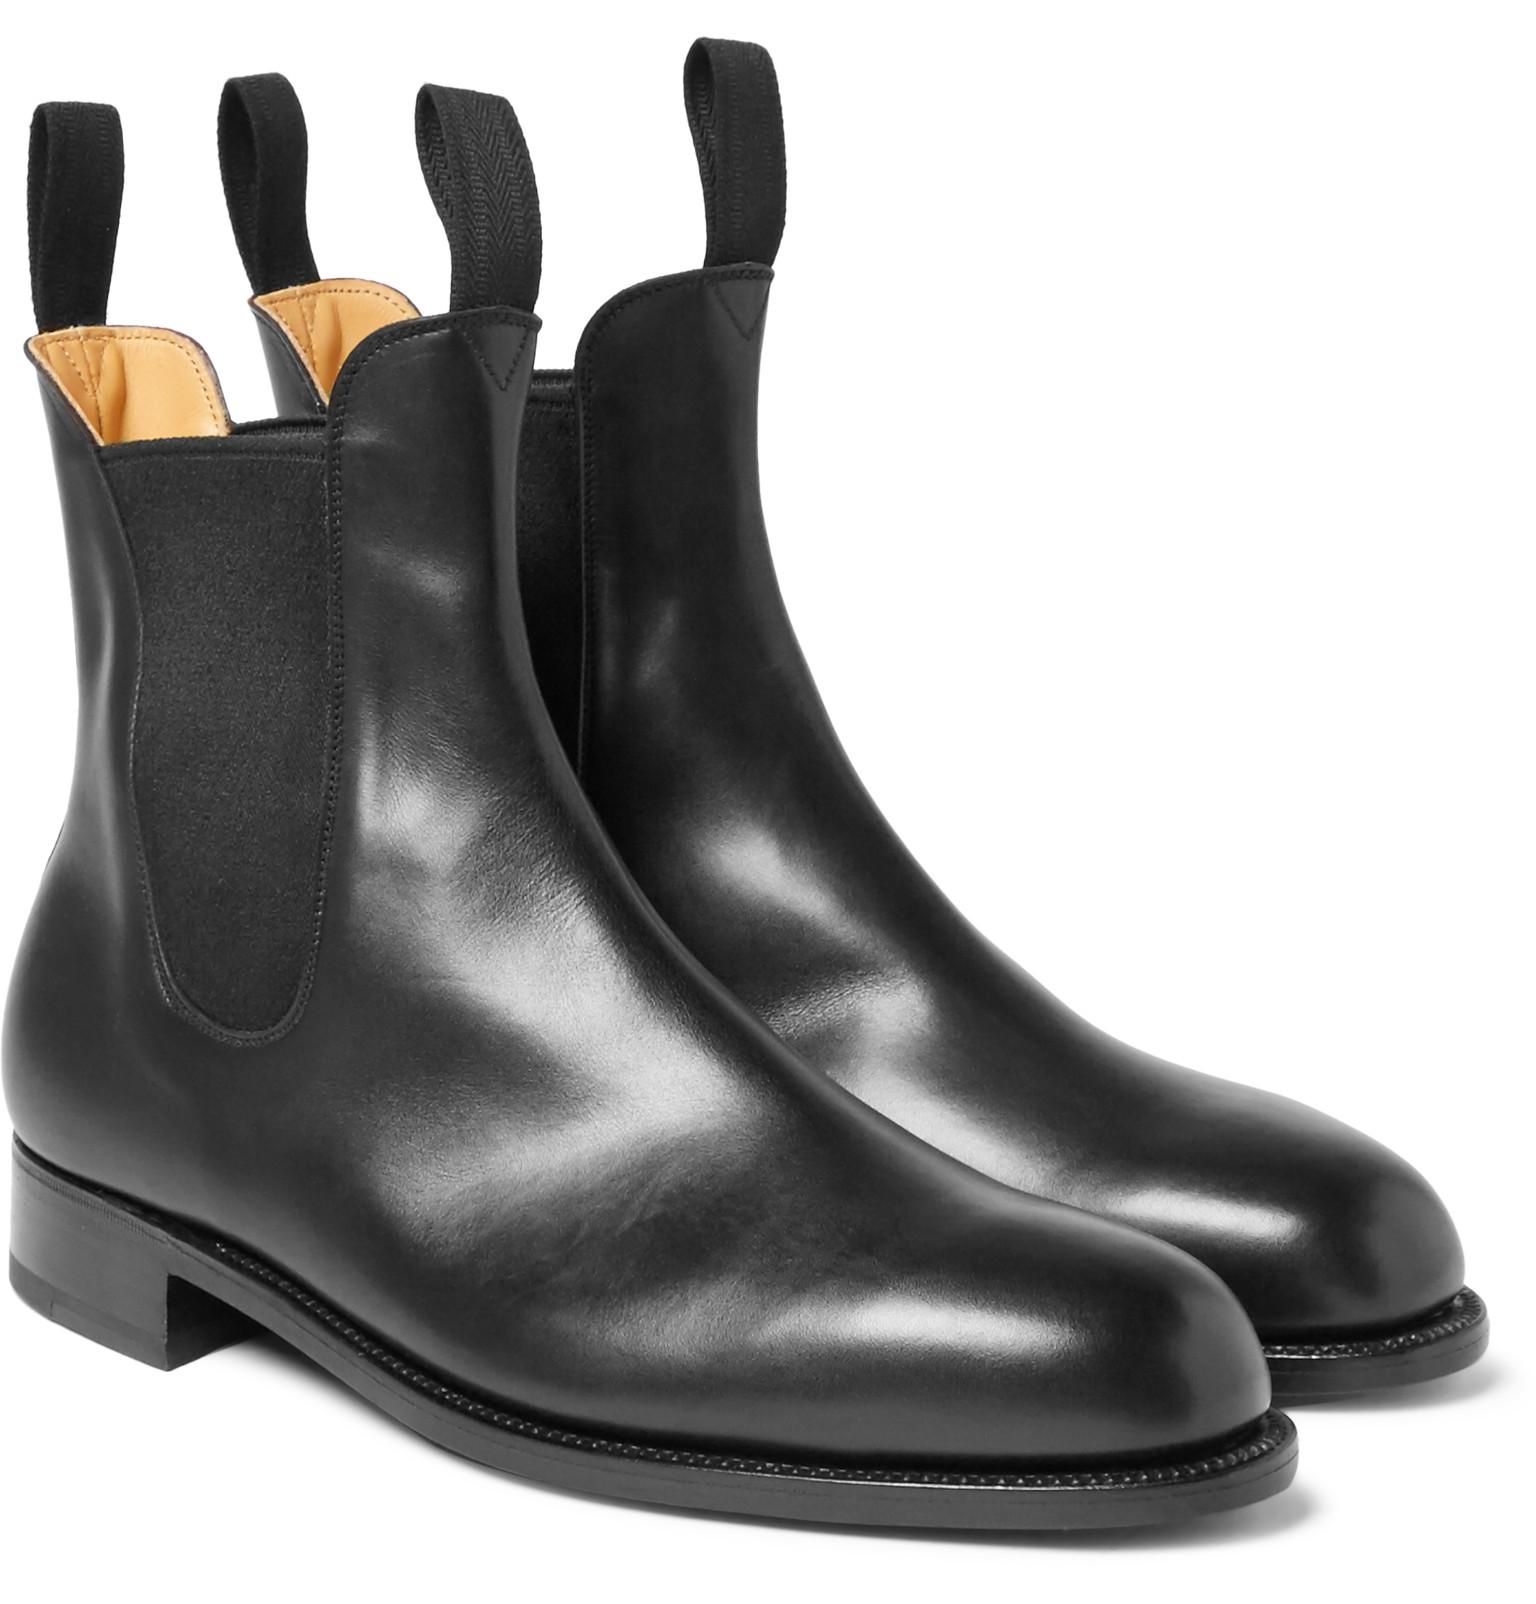 J.M. Weston Leather Chelsea Boots in Black for Men - Lyst